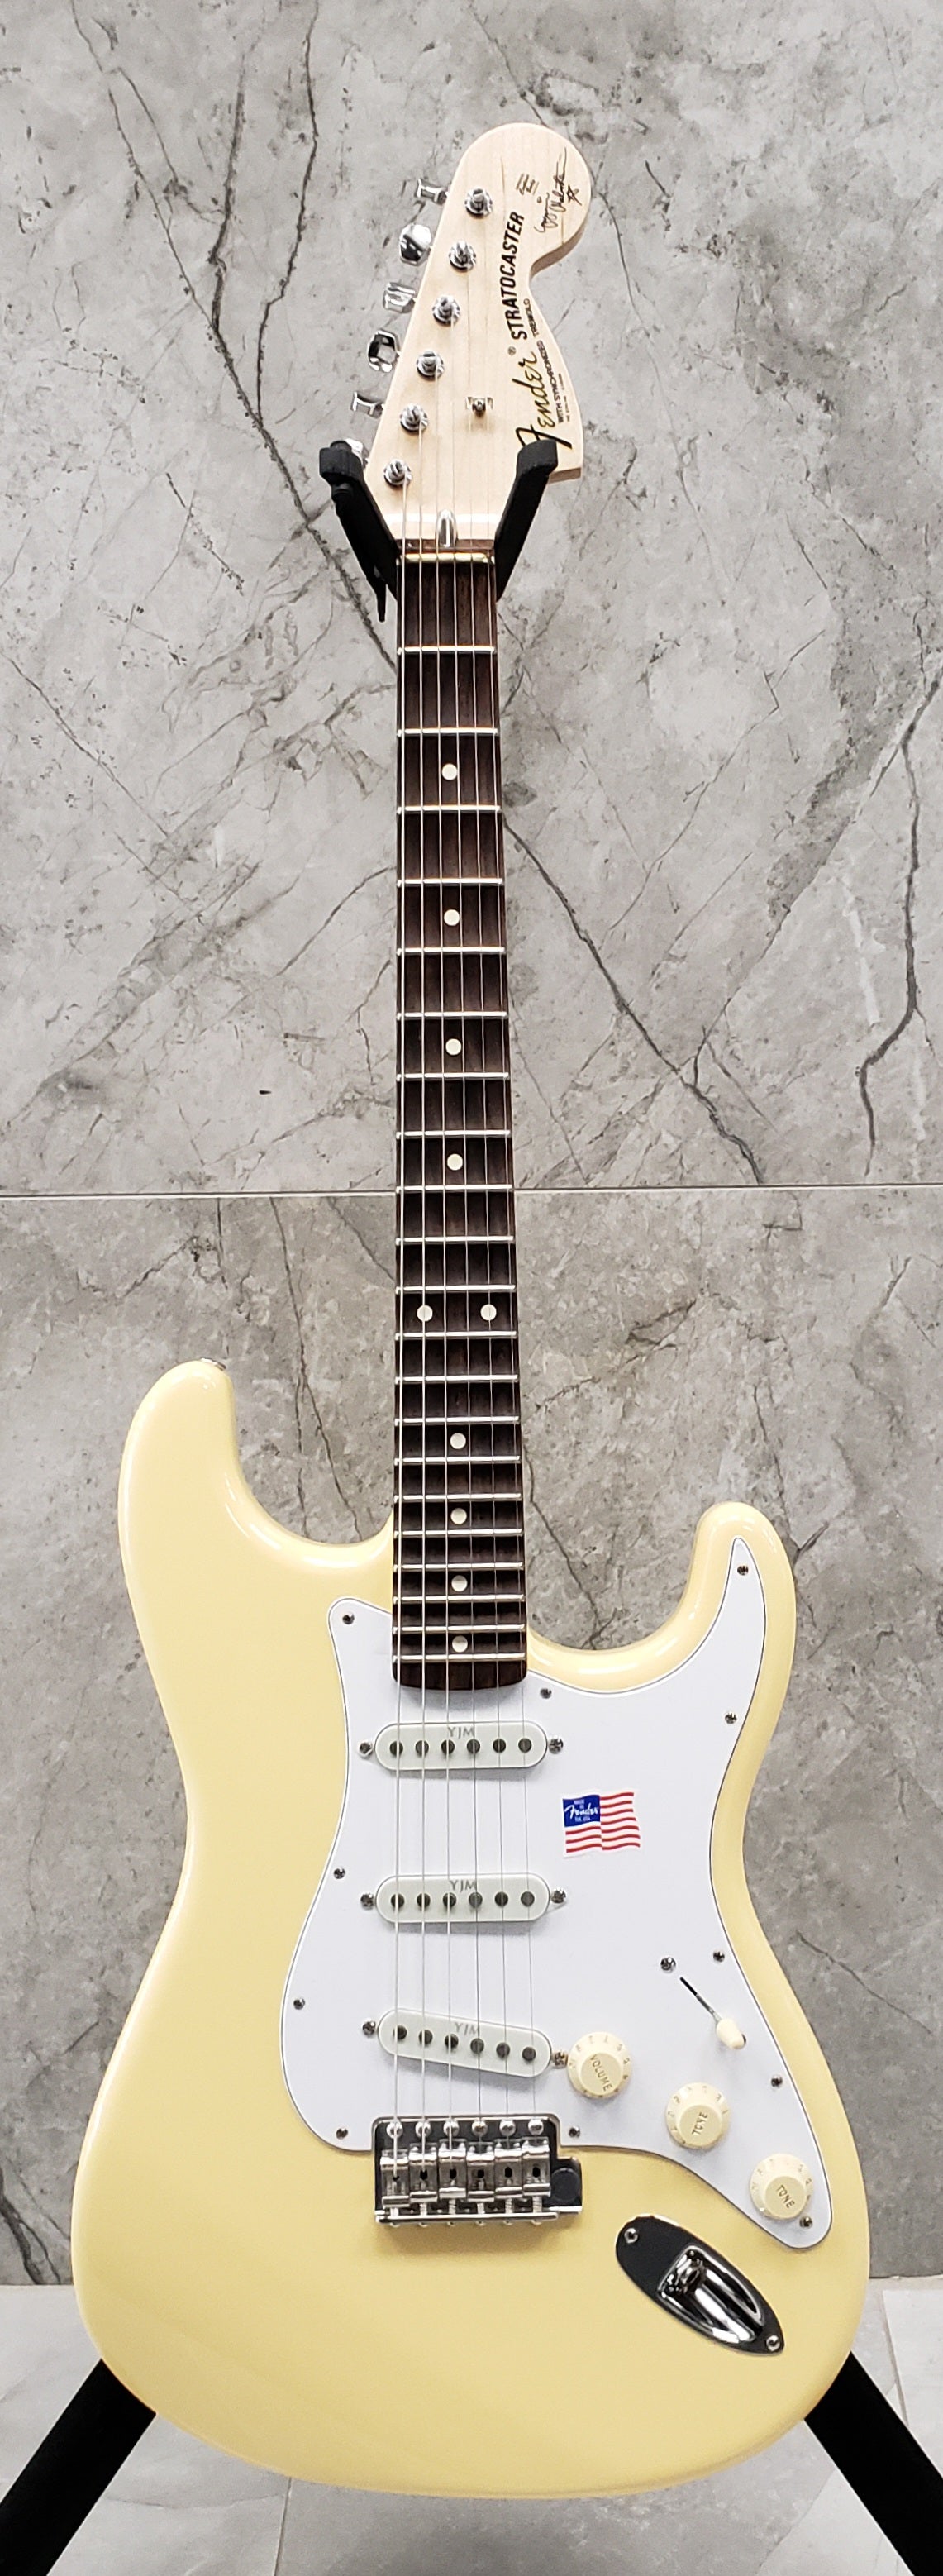 Fender Yngwie Malmsteen Stratocaster Scalloped Rosewood Fingerboard Vintage White 0107110841